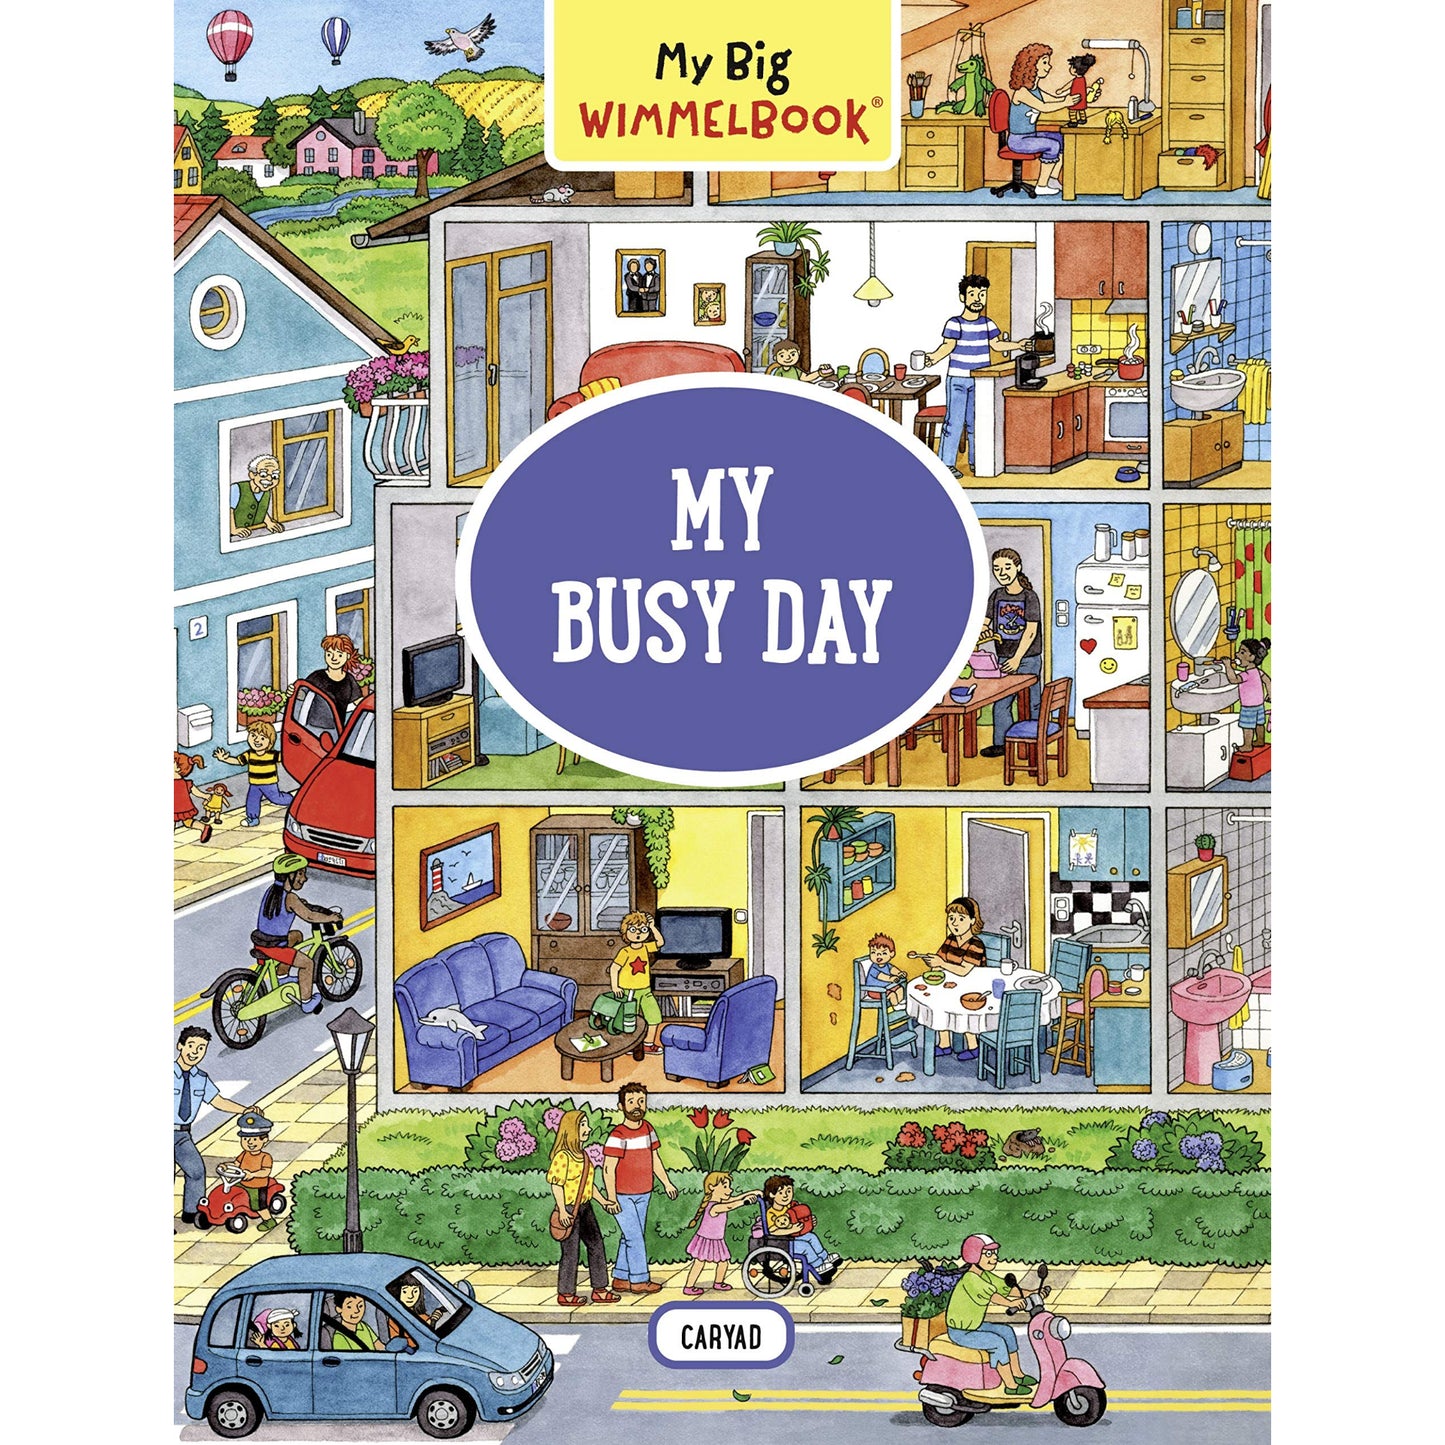 My Big Wimmelbook My Busy Day